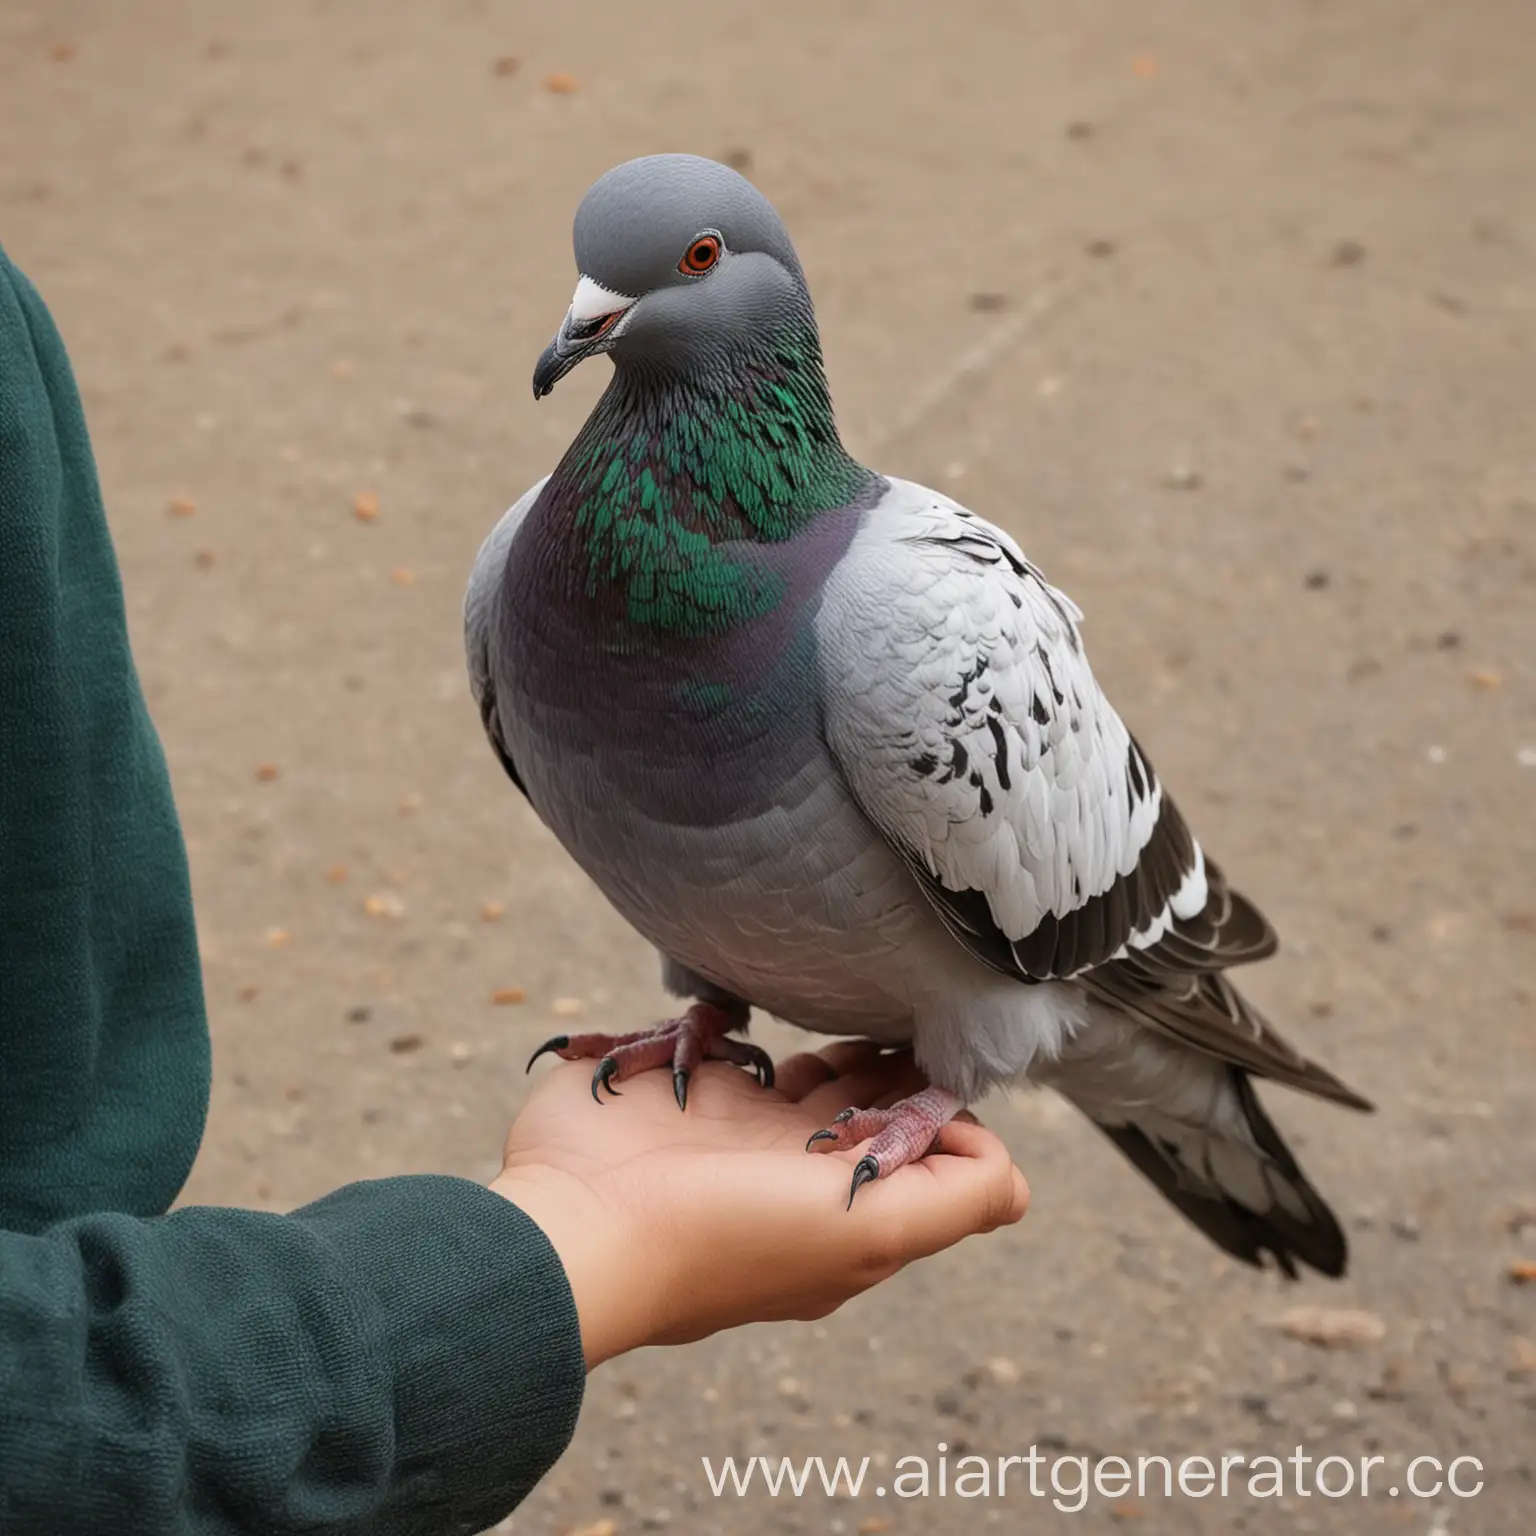 Petting-Pigeon-Gentle-Interaction-with-a-Feeding-Bird